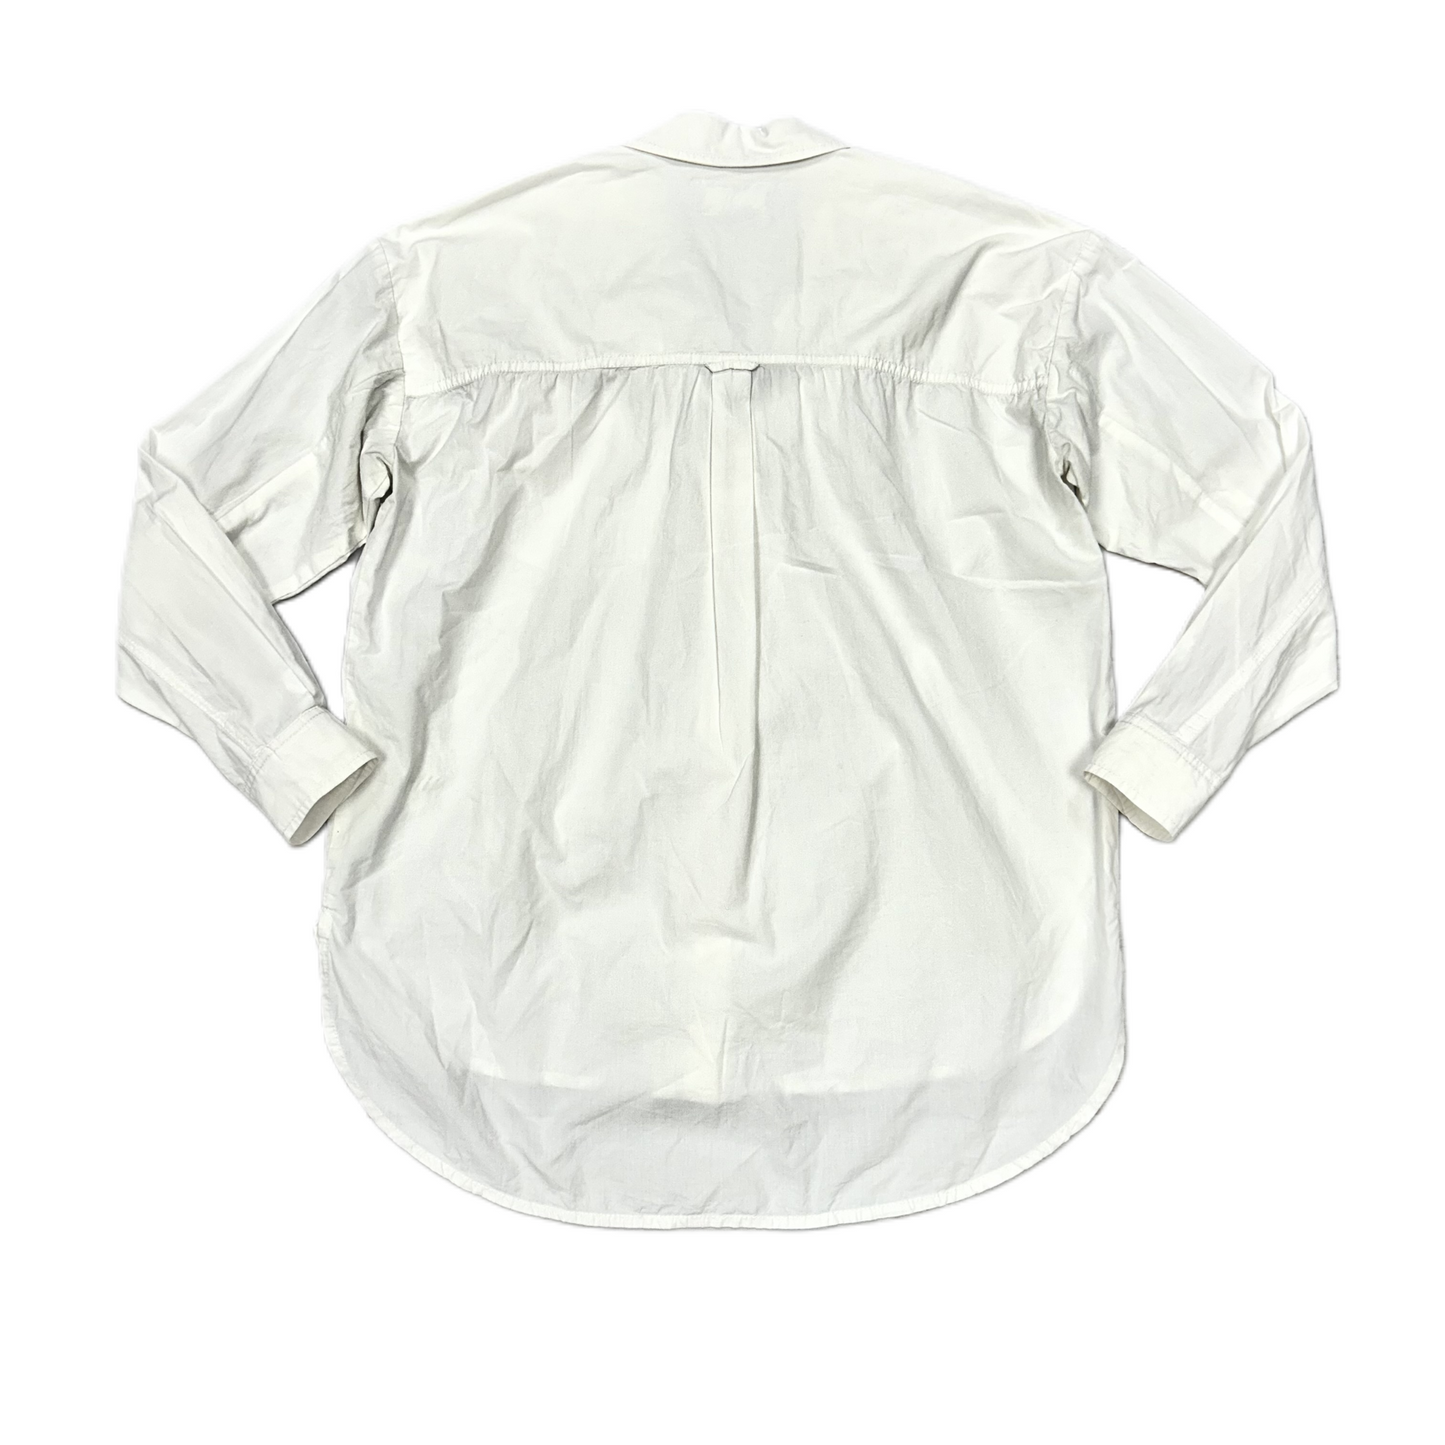 White Top Long Sleeve By Pilcro, Size: Xs